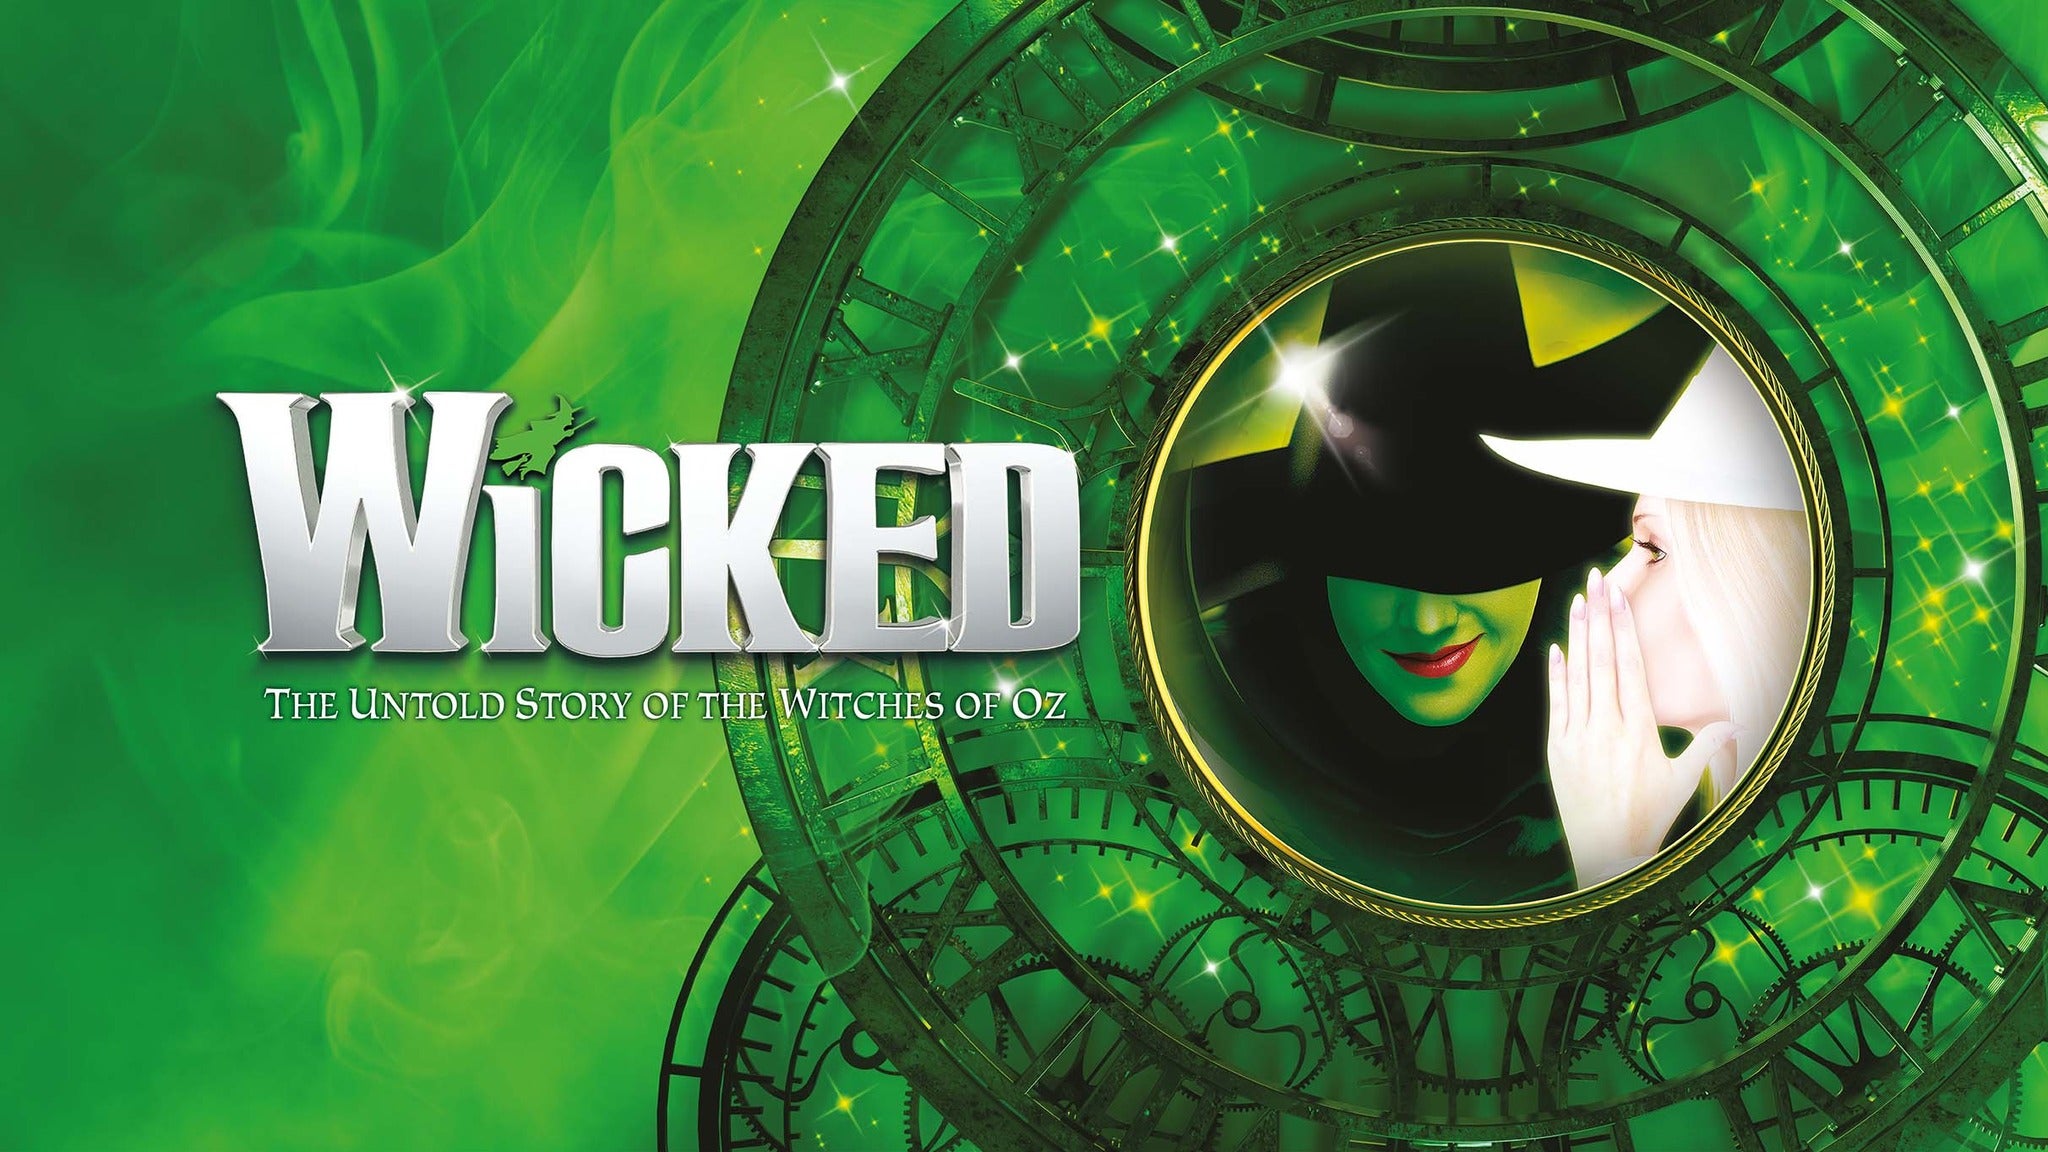 wicked uk tour tickets